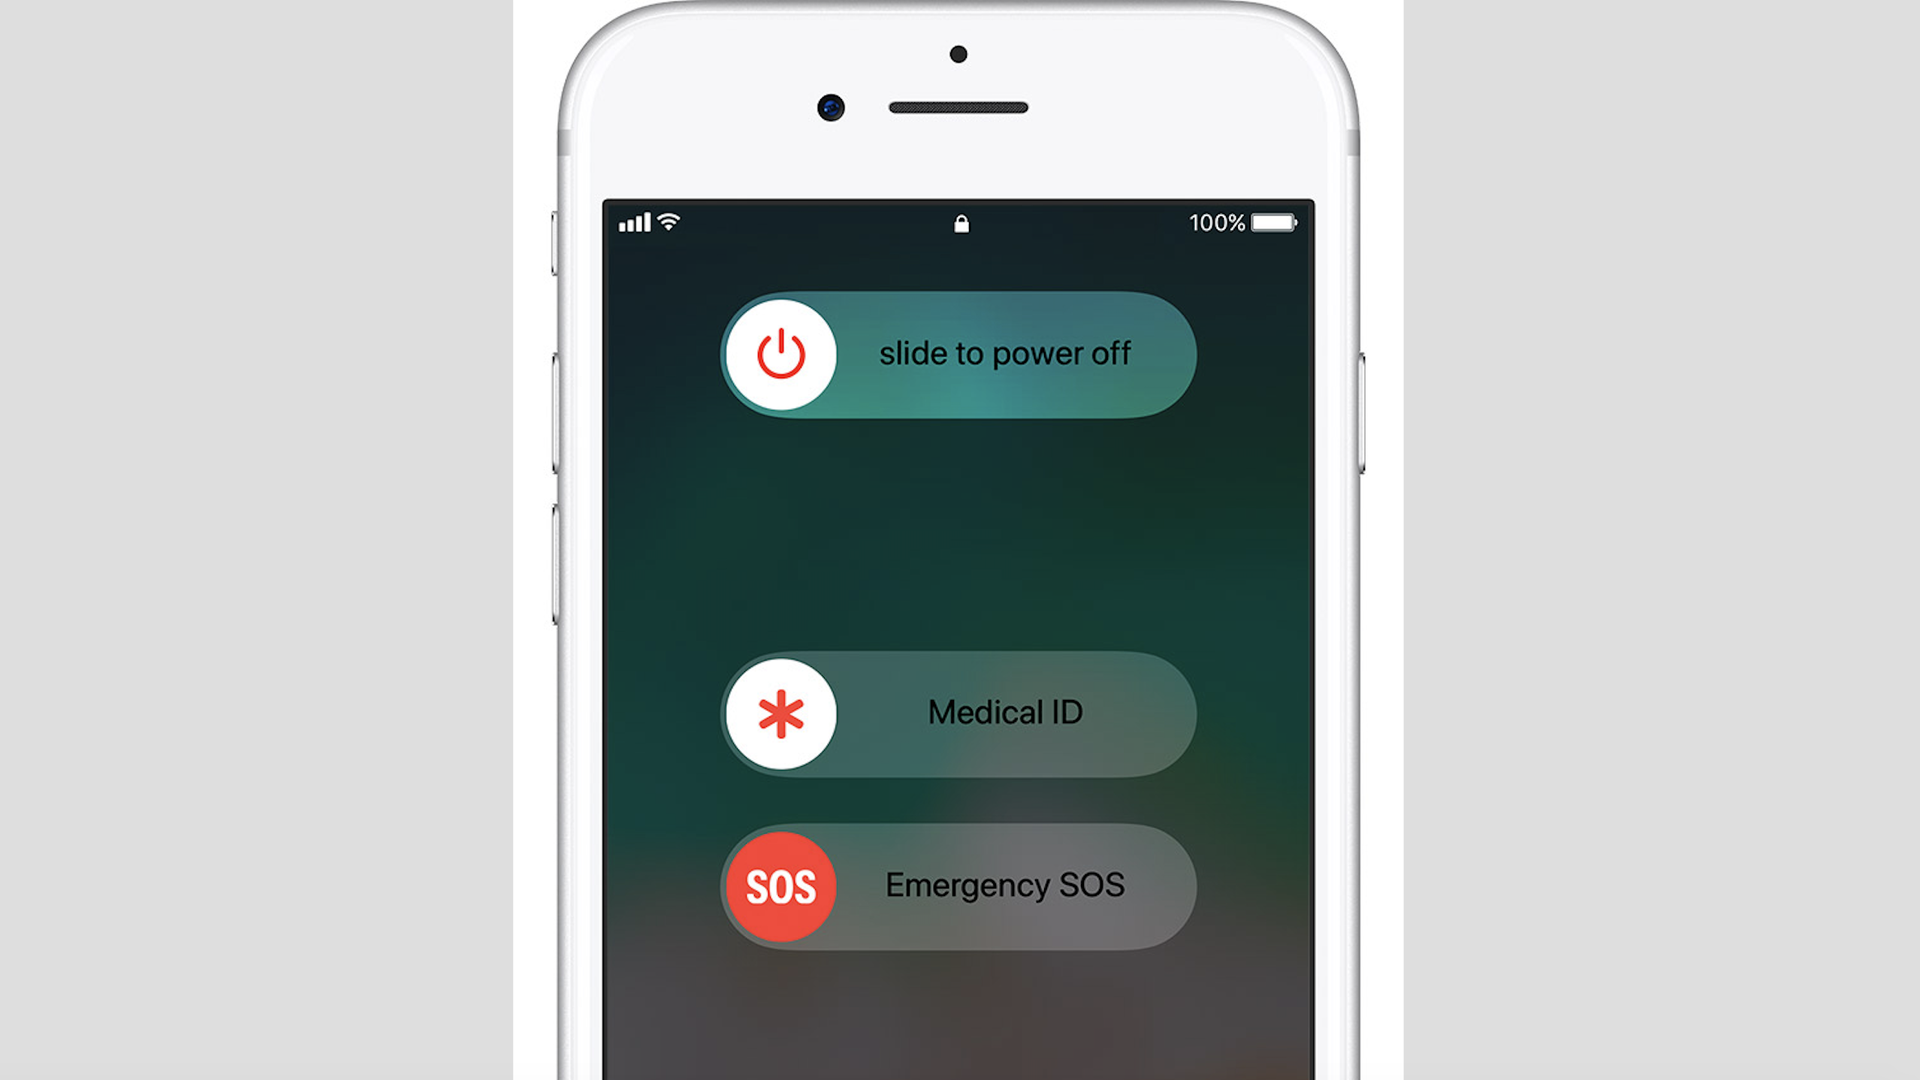 The emergency calling feature on an iPhone